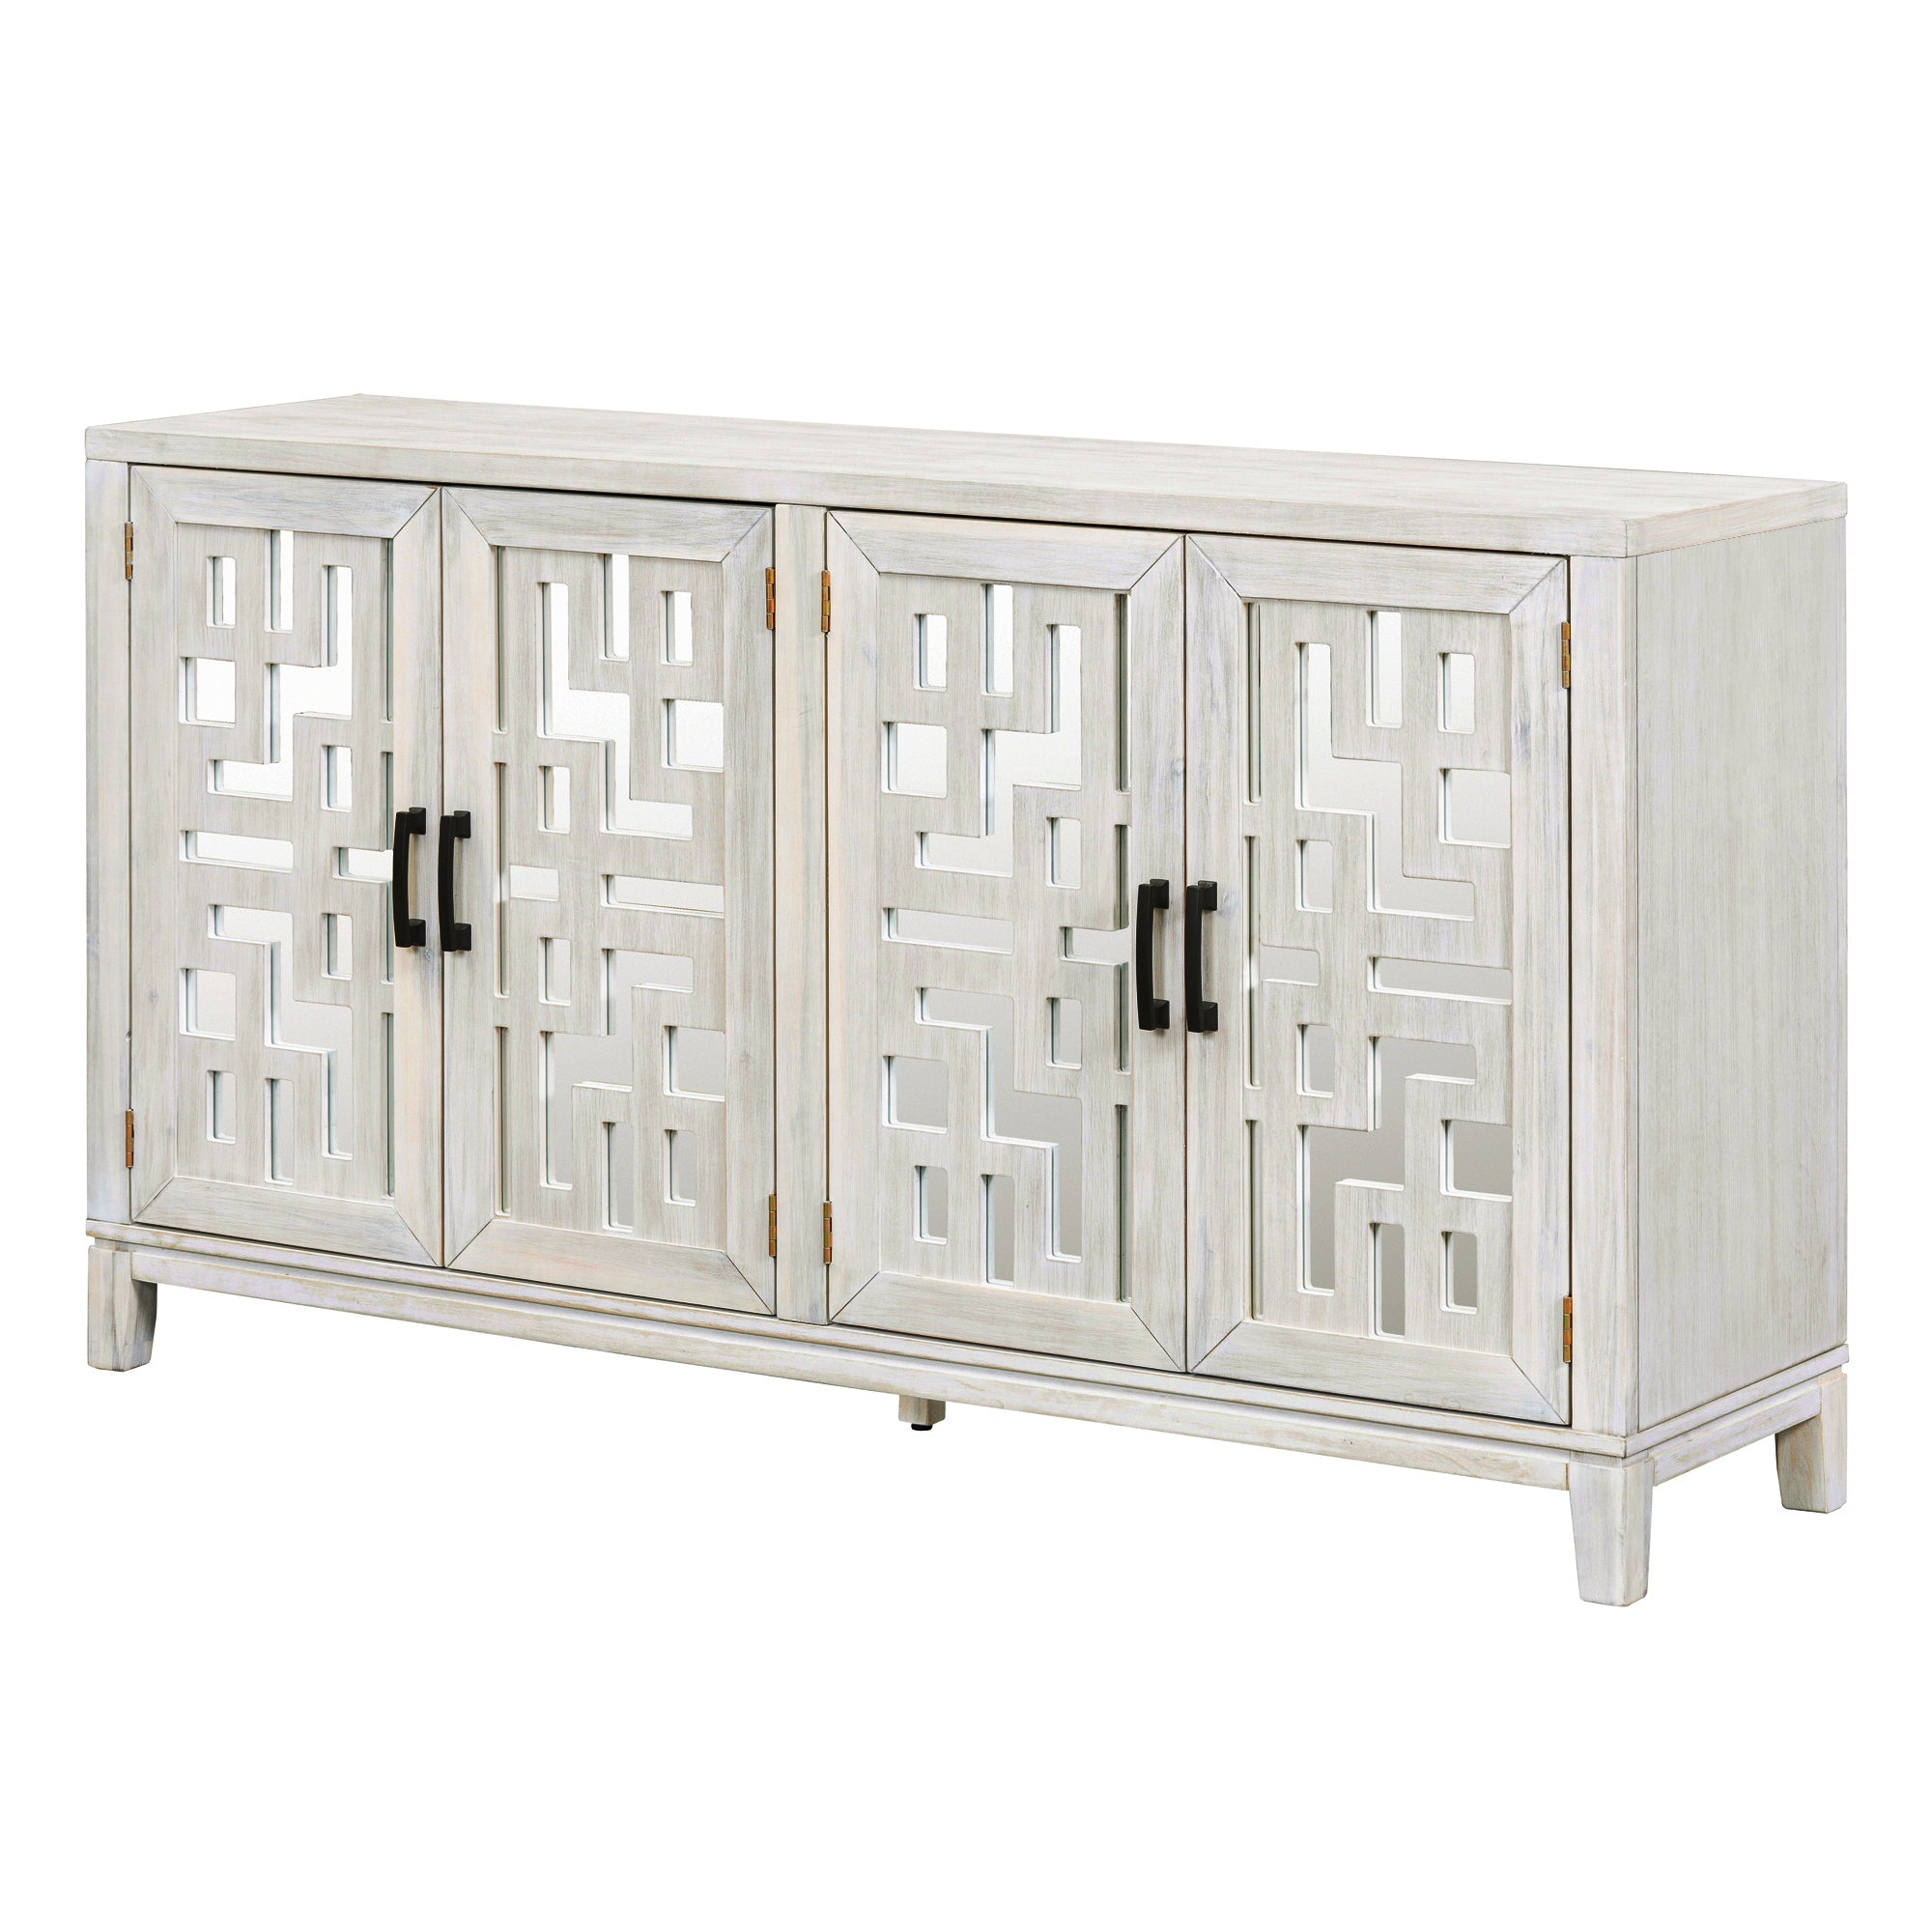 Retro 4 Door Mirrored Buffet Sideboard with natural wood wash-solid wood